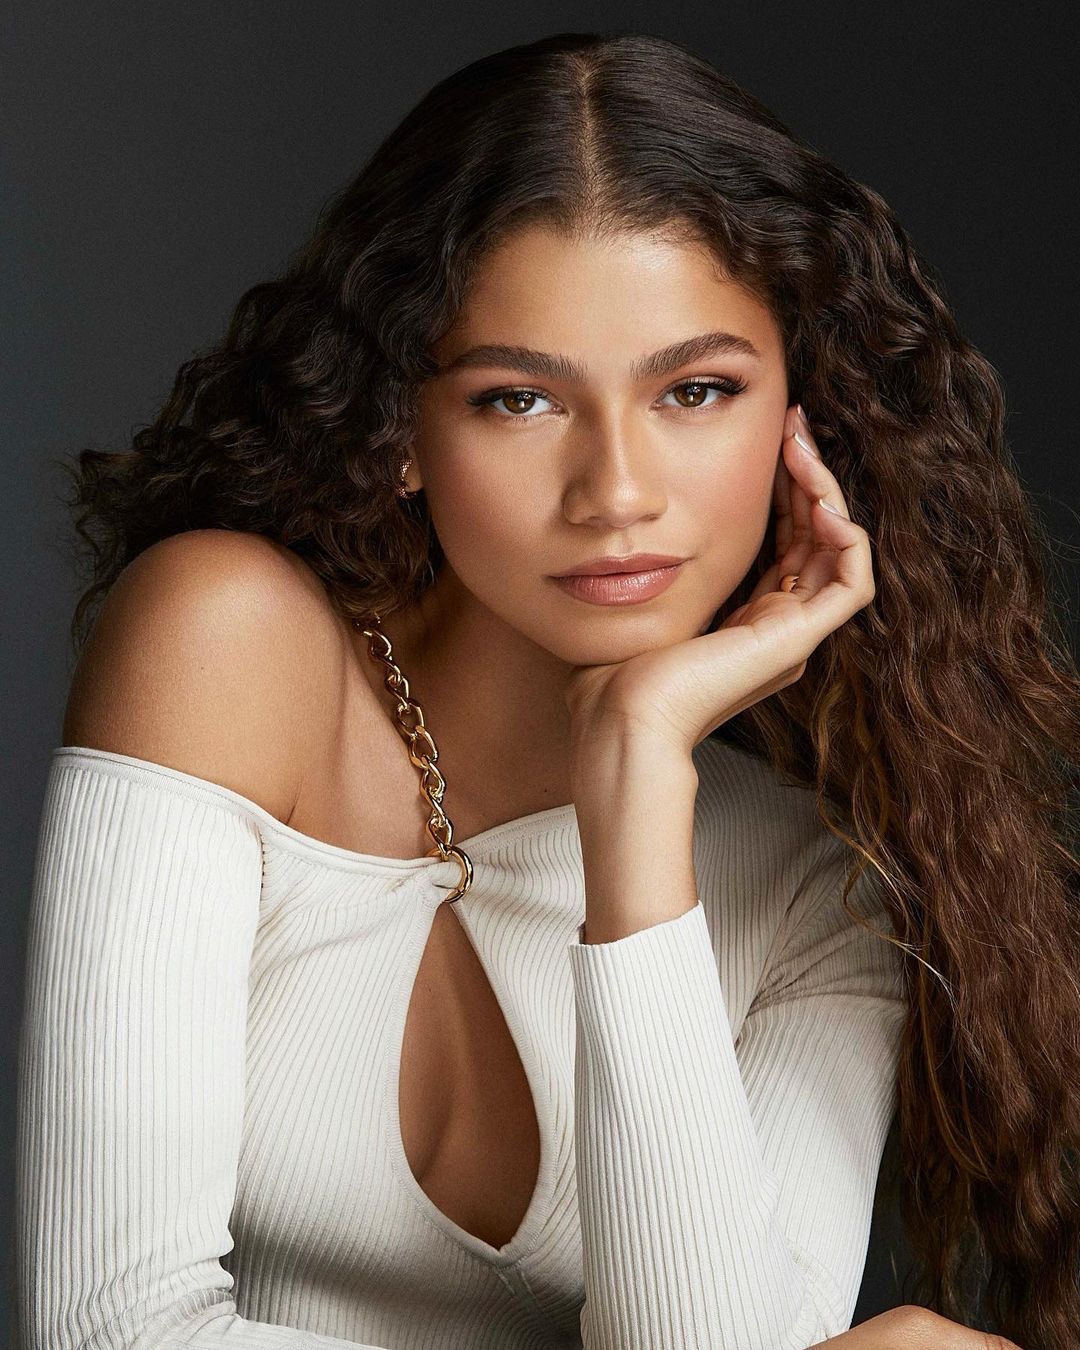 20 Facts about Zendaya Every Fan Should Know 